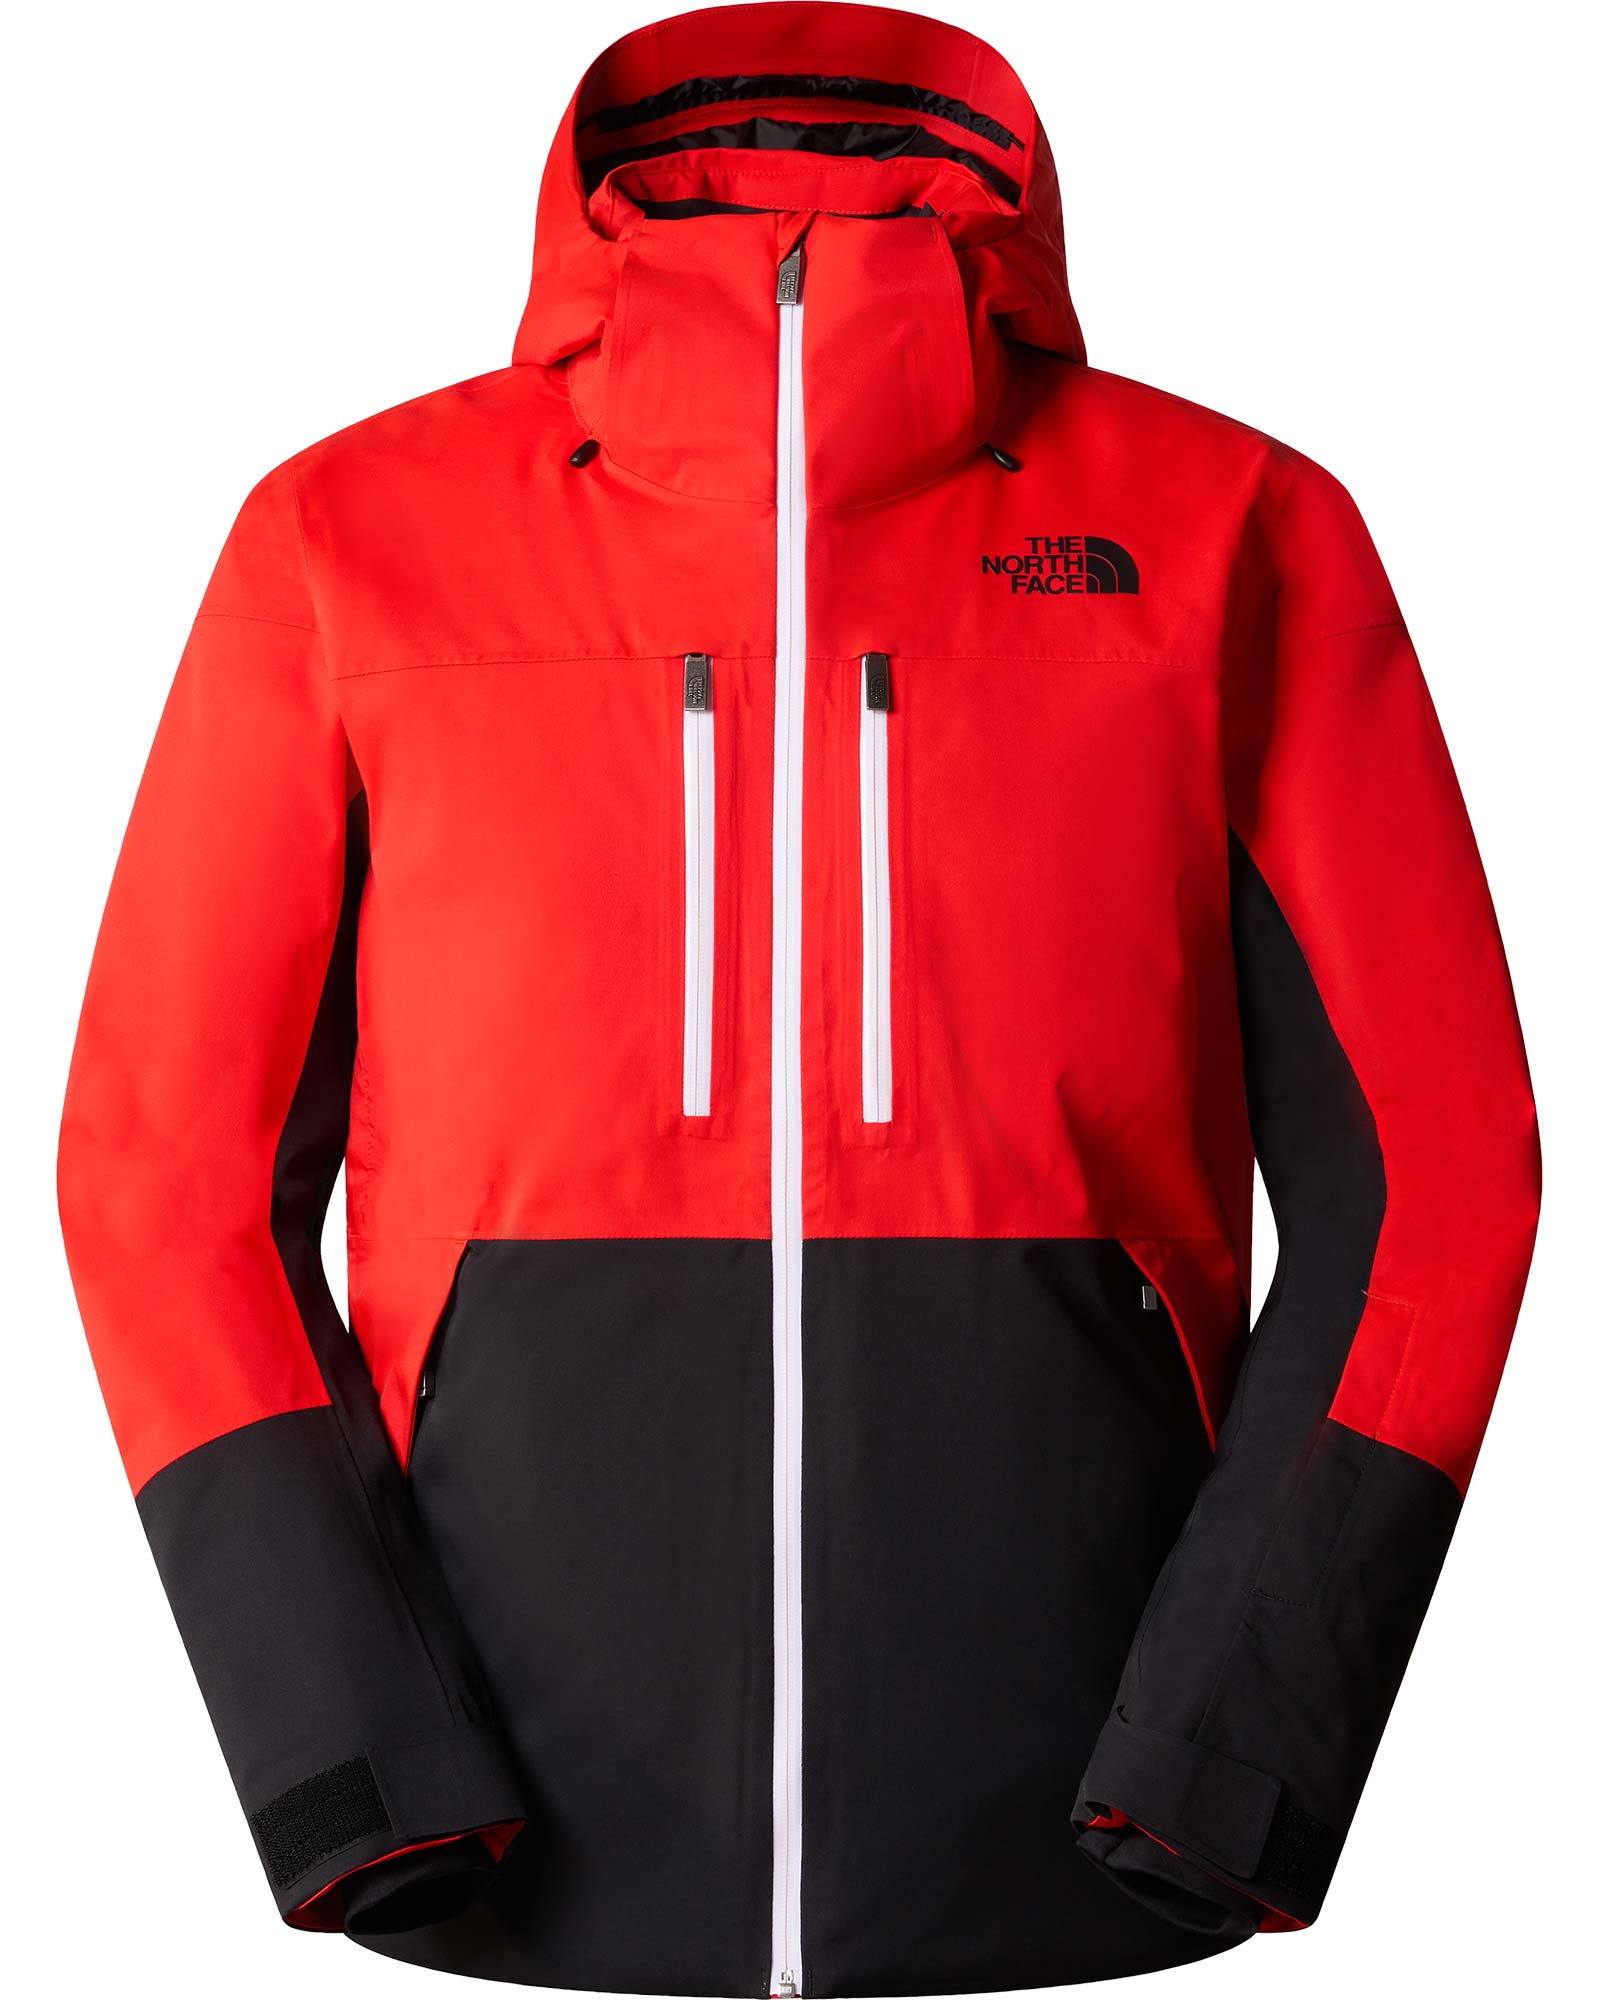 The North Face Chakal Men’s Jacket - Fiery Red/TNF Black M